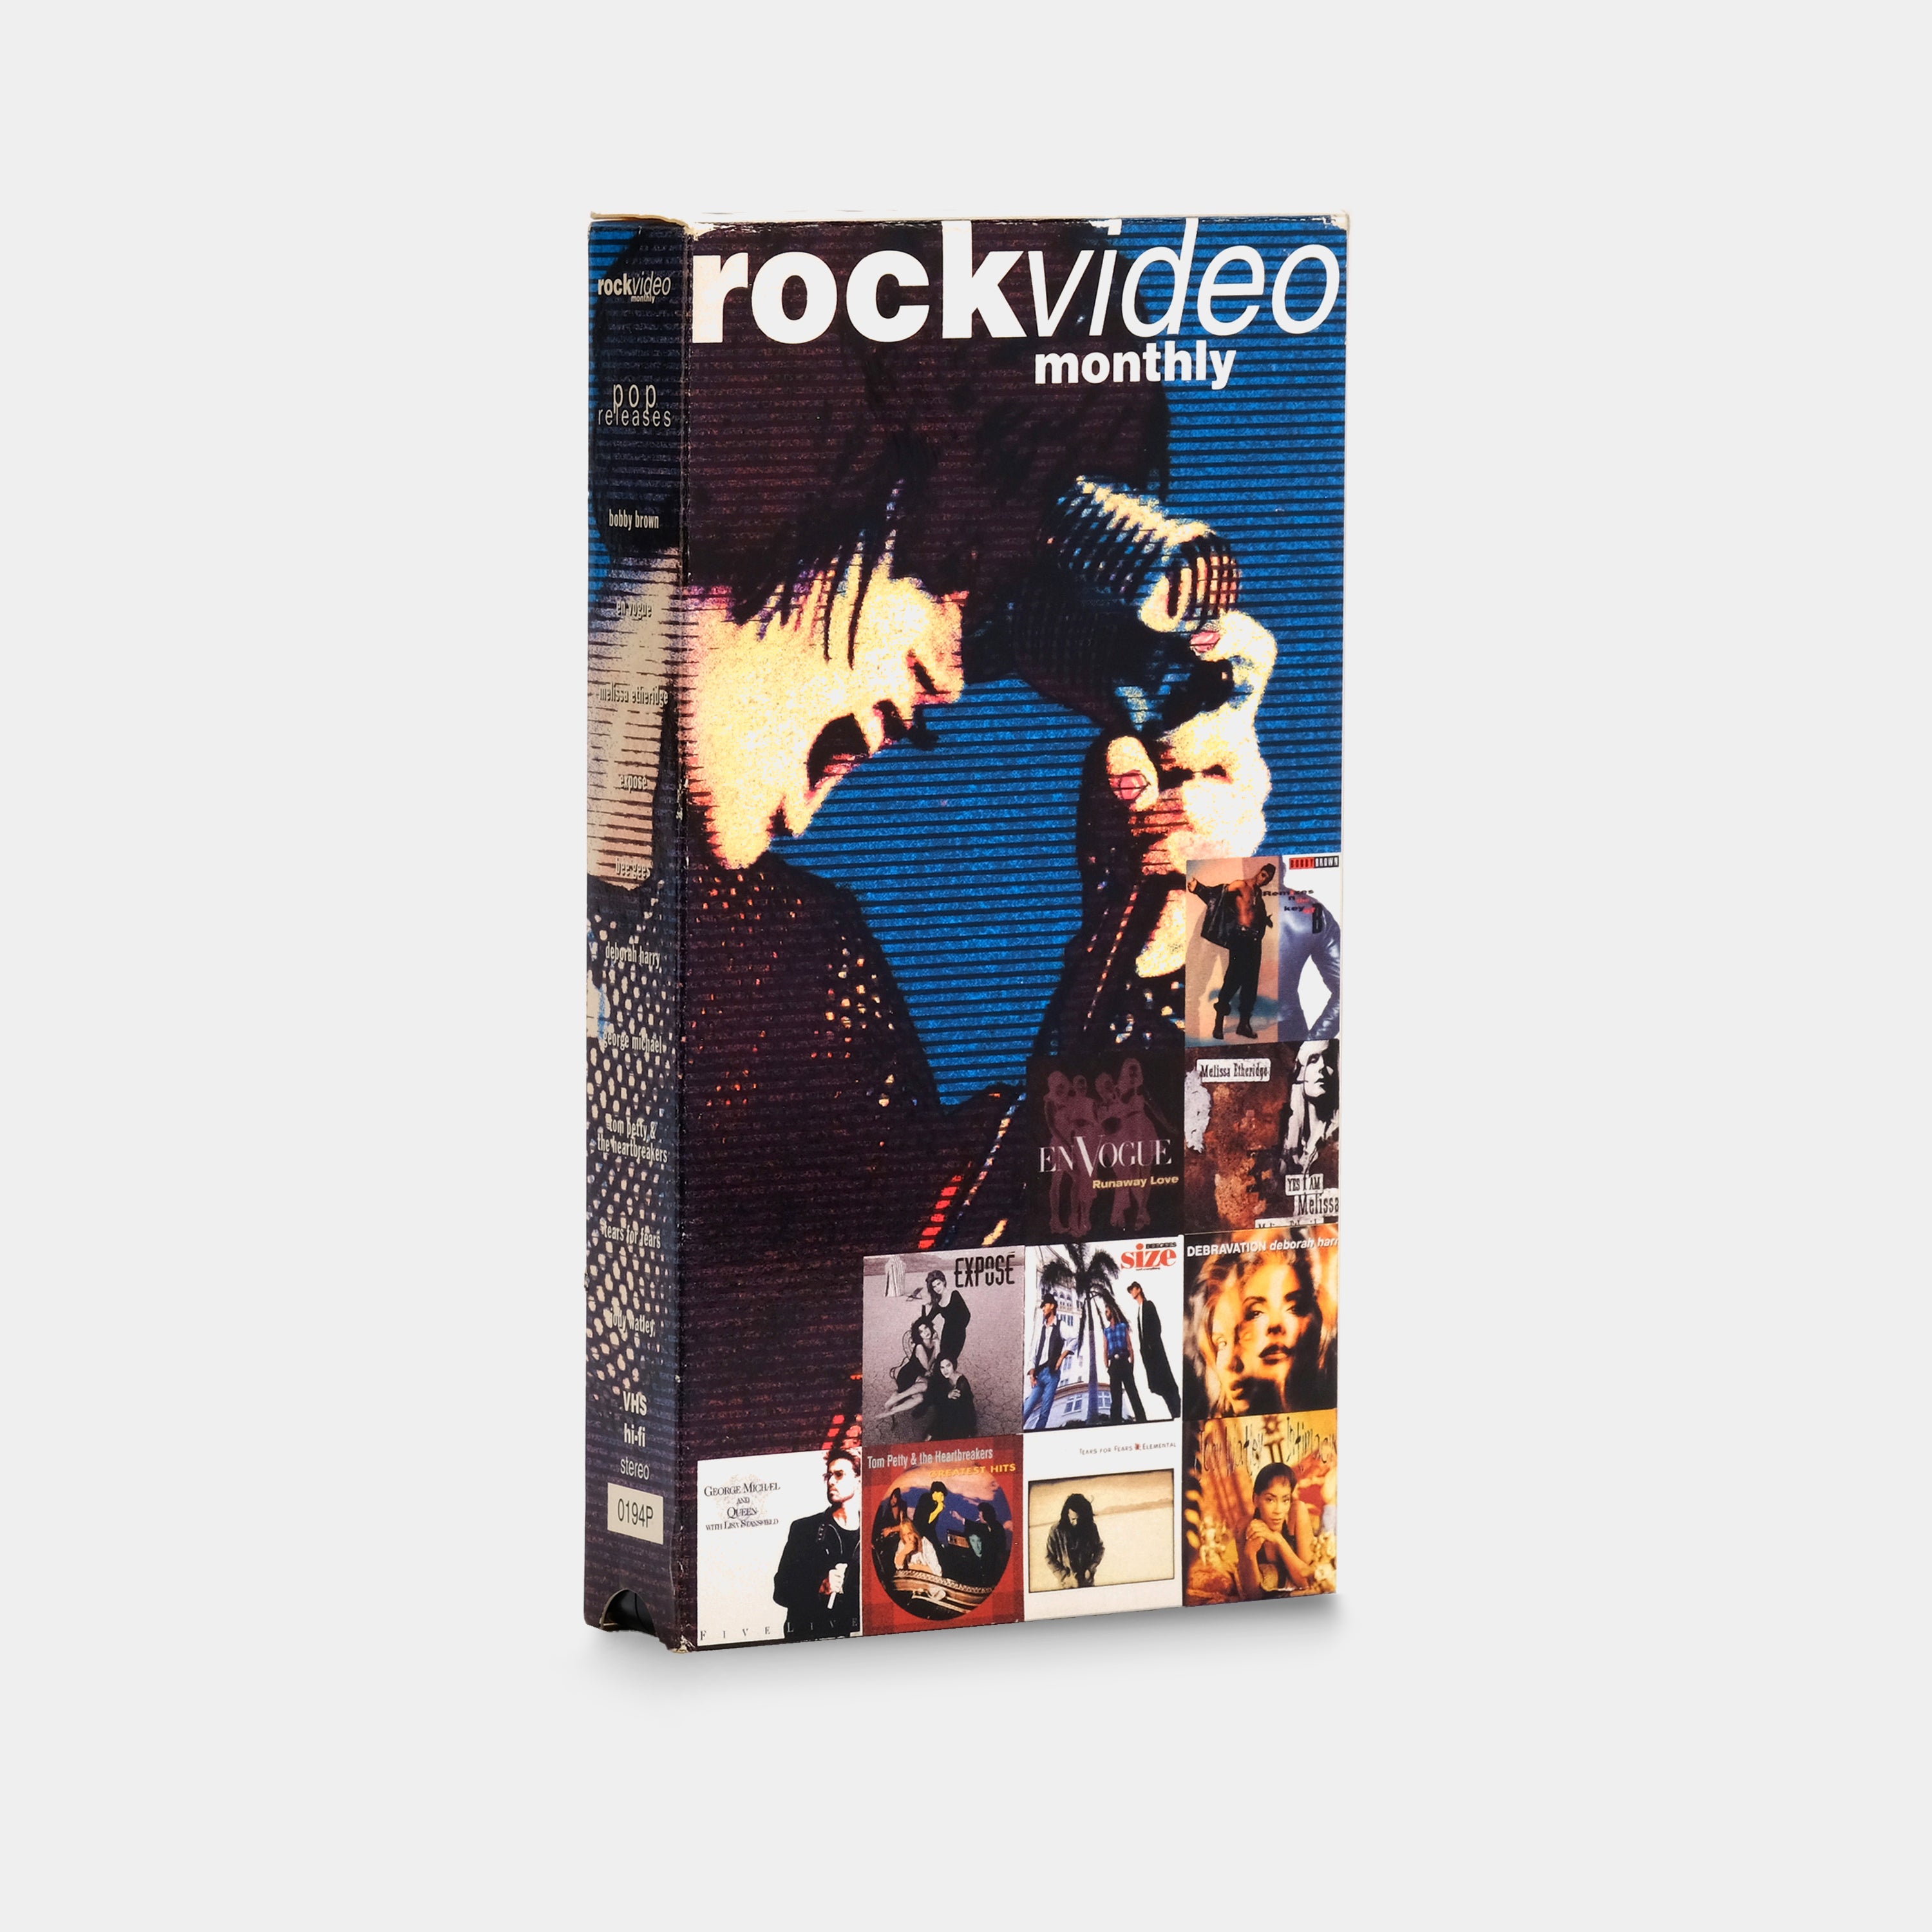 RockVideo Monthly - Pop Releases January 1994 VHS Tape